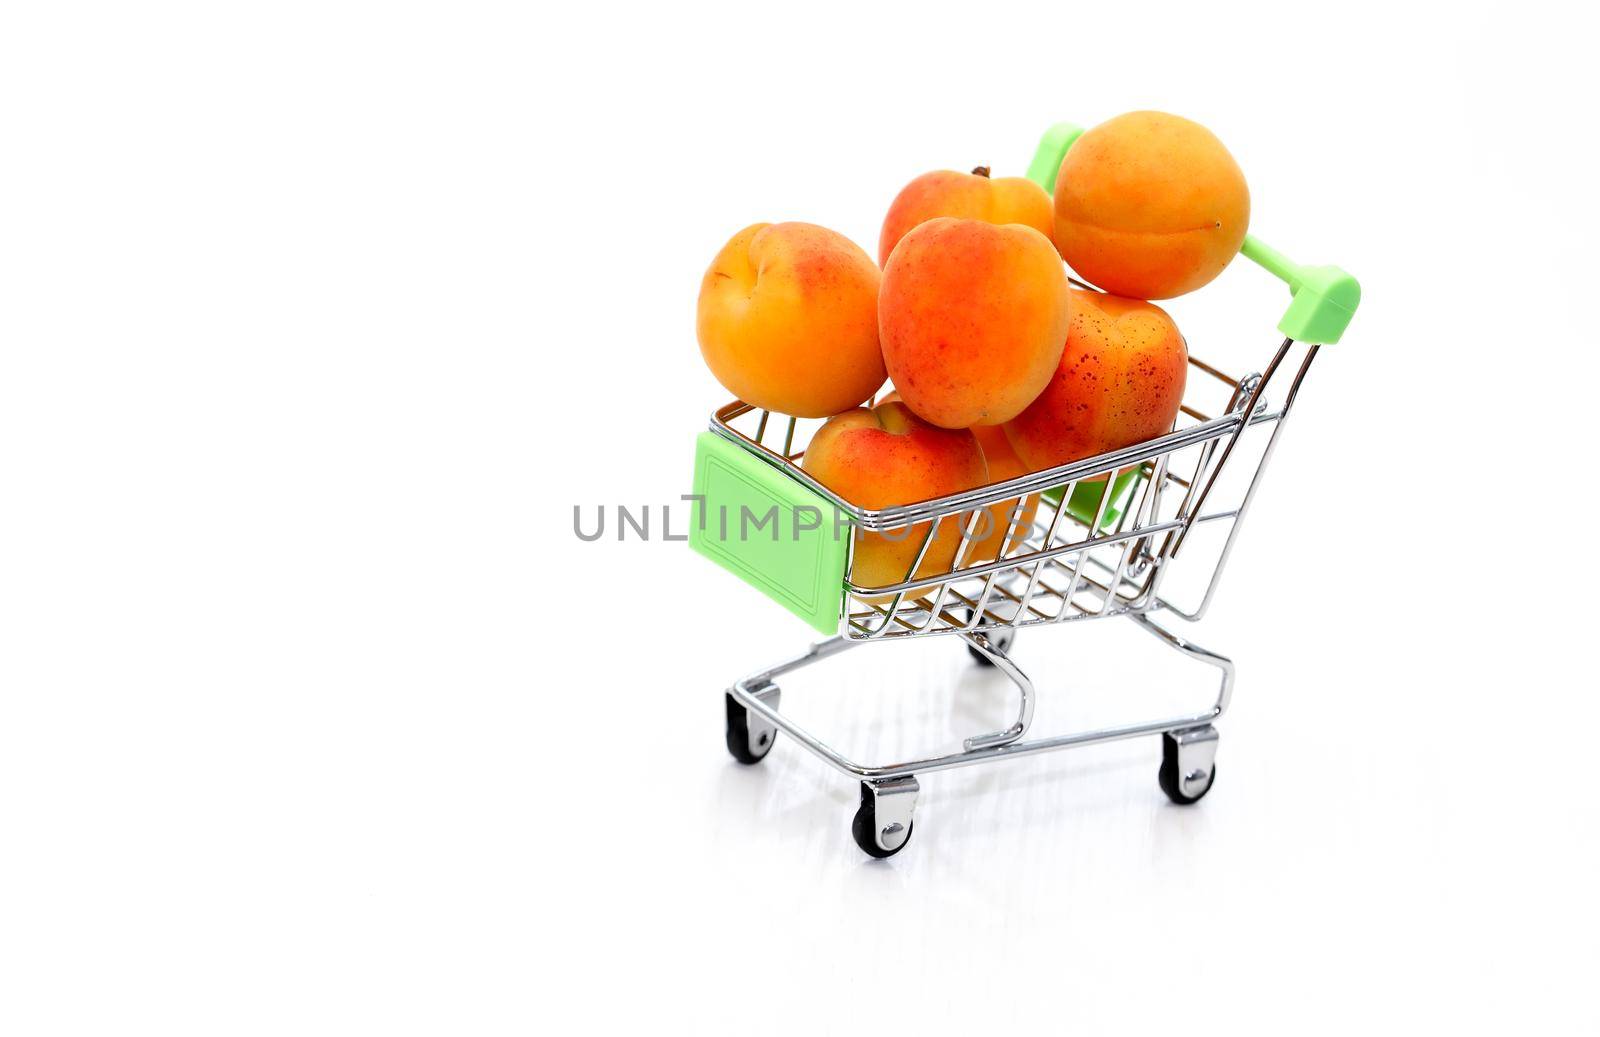 Healthy eating concept. Shopping cart with freshness apricots